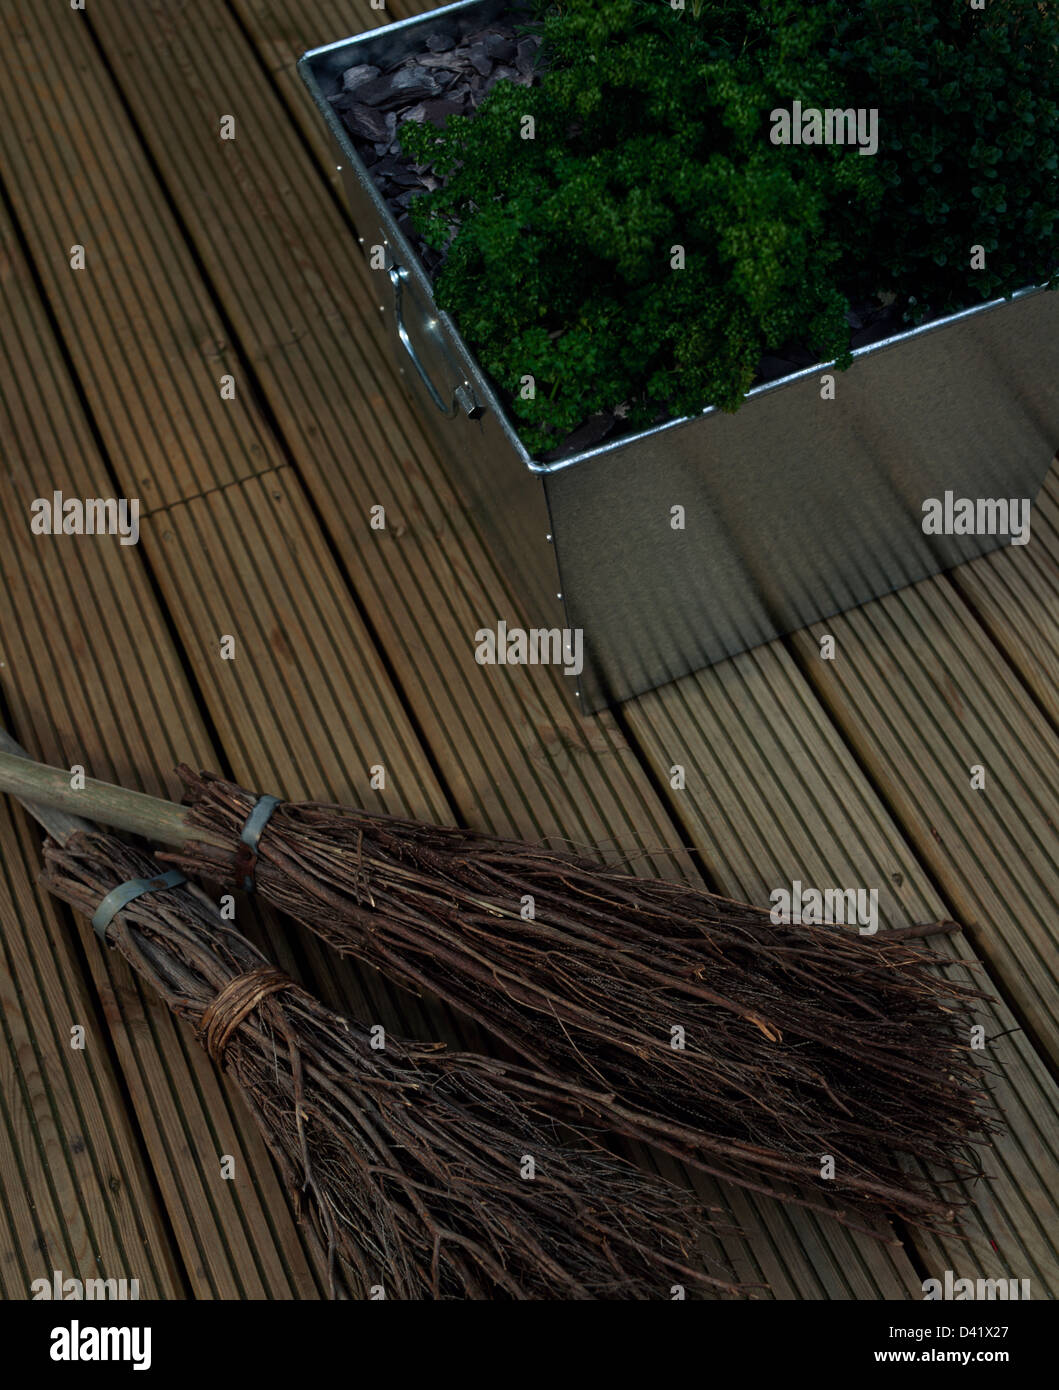 Close-up of two besom brooms on wooden decking with herbs growing in galvanized steel planter Stock Photo